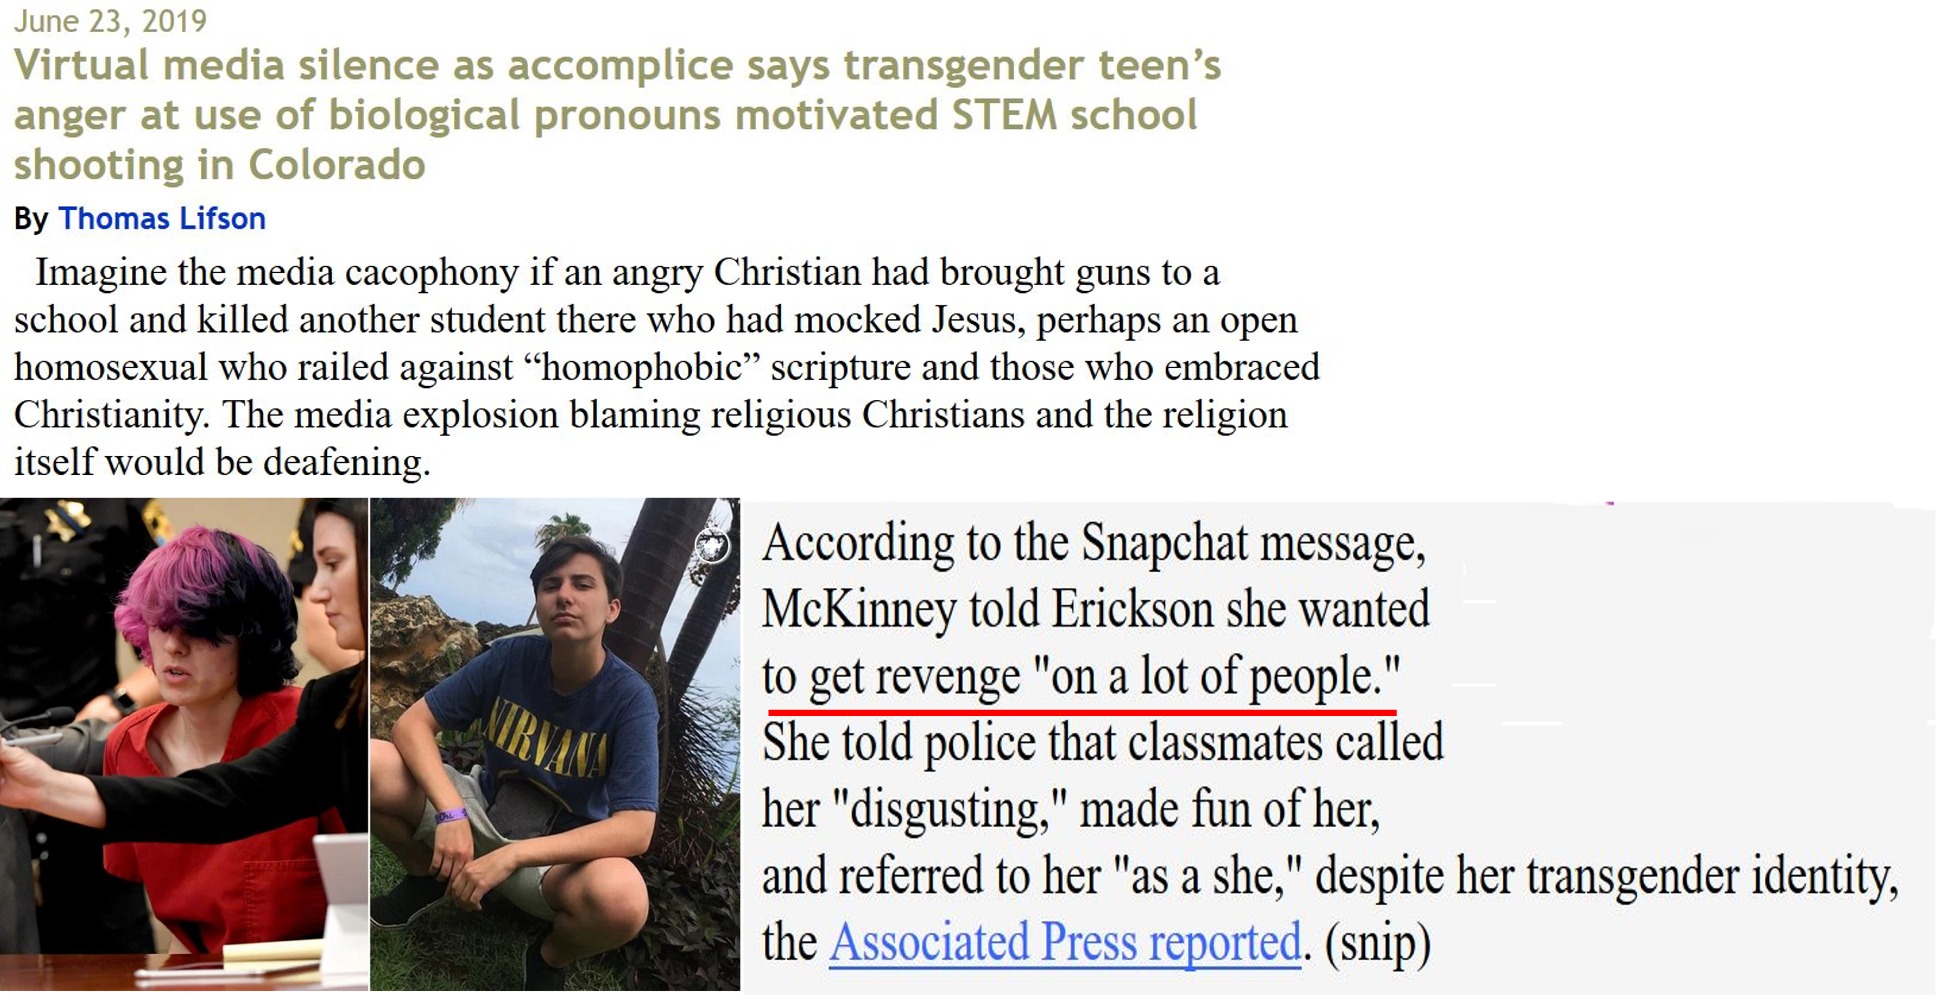 friendship - Virtual media silence as accomplice says transgender teen's anger at use of biological pronouns motivated Stem school shooting in Colorado By Thomas Lifson Imagine the media cacophony if an angry Christian had brought guns to a school and kil